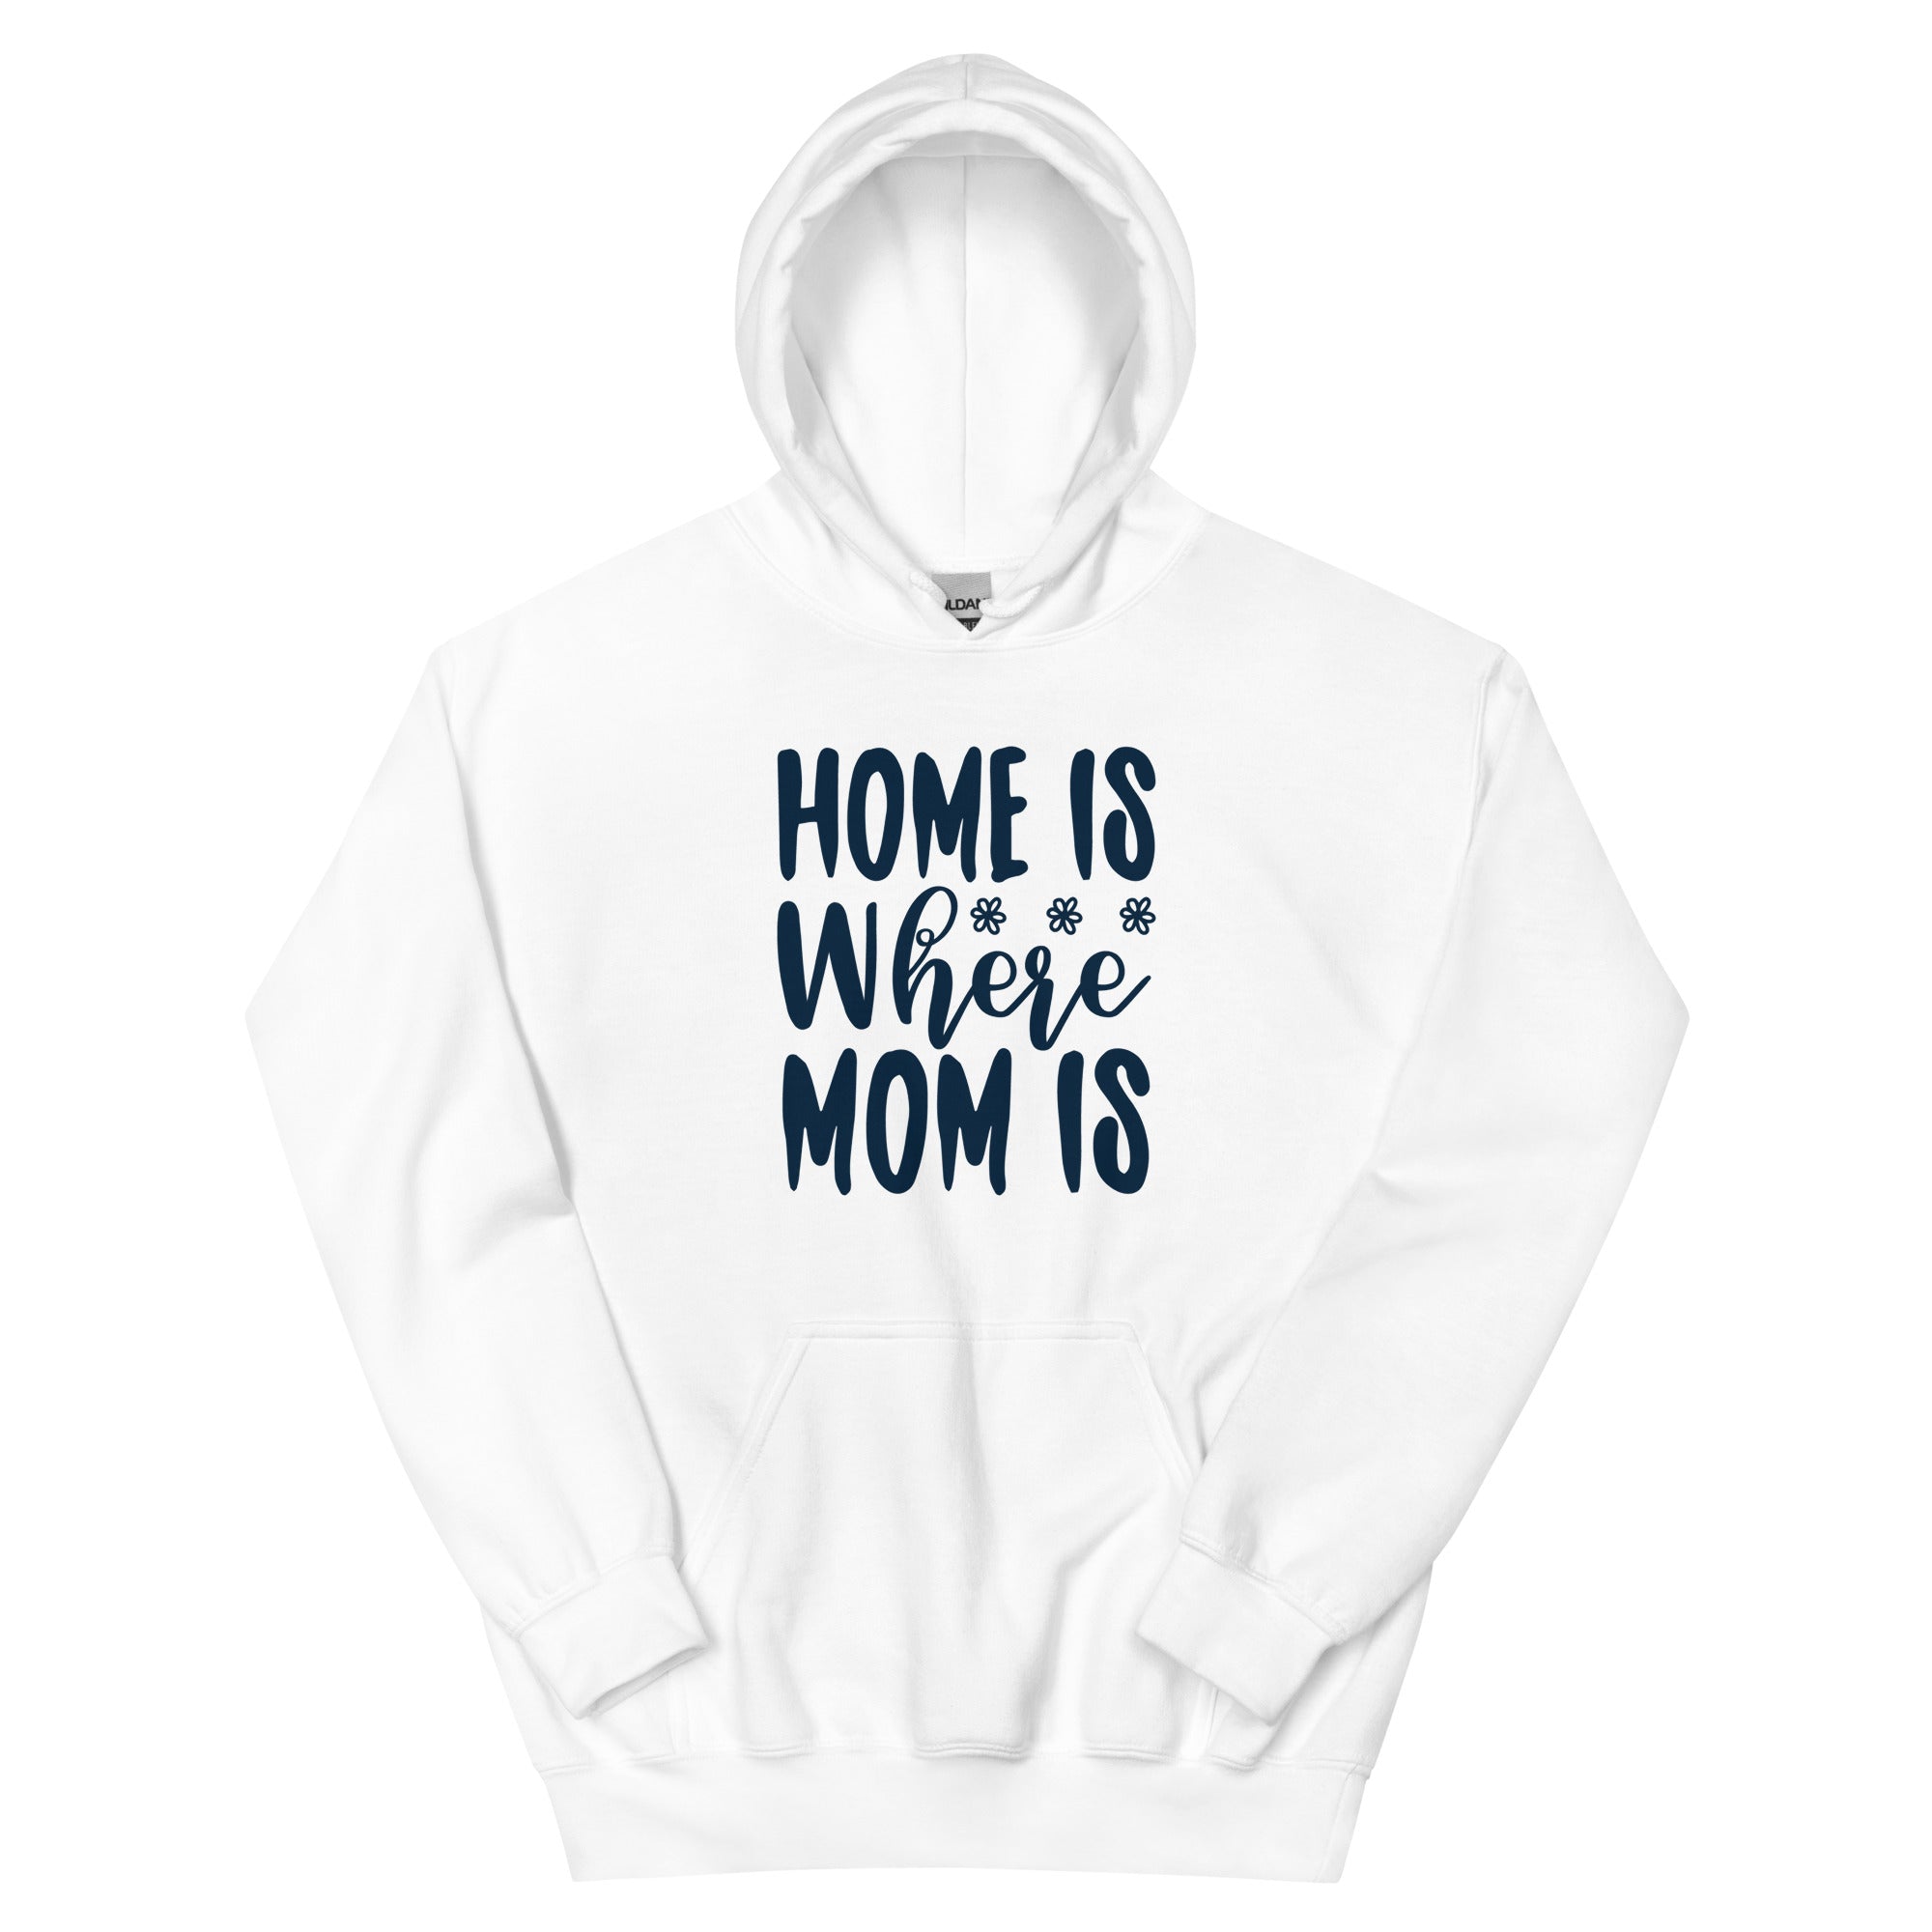 Home Is Where Mom Is - Unisex Hoodie